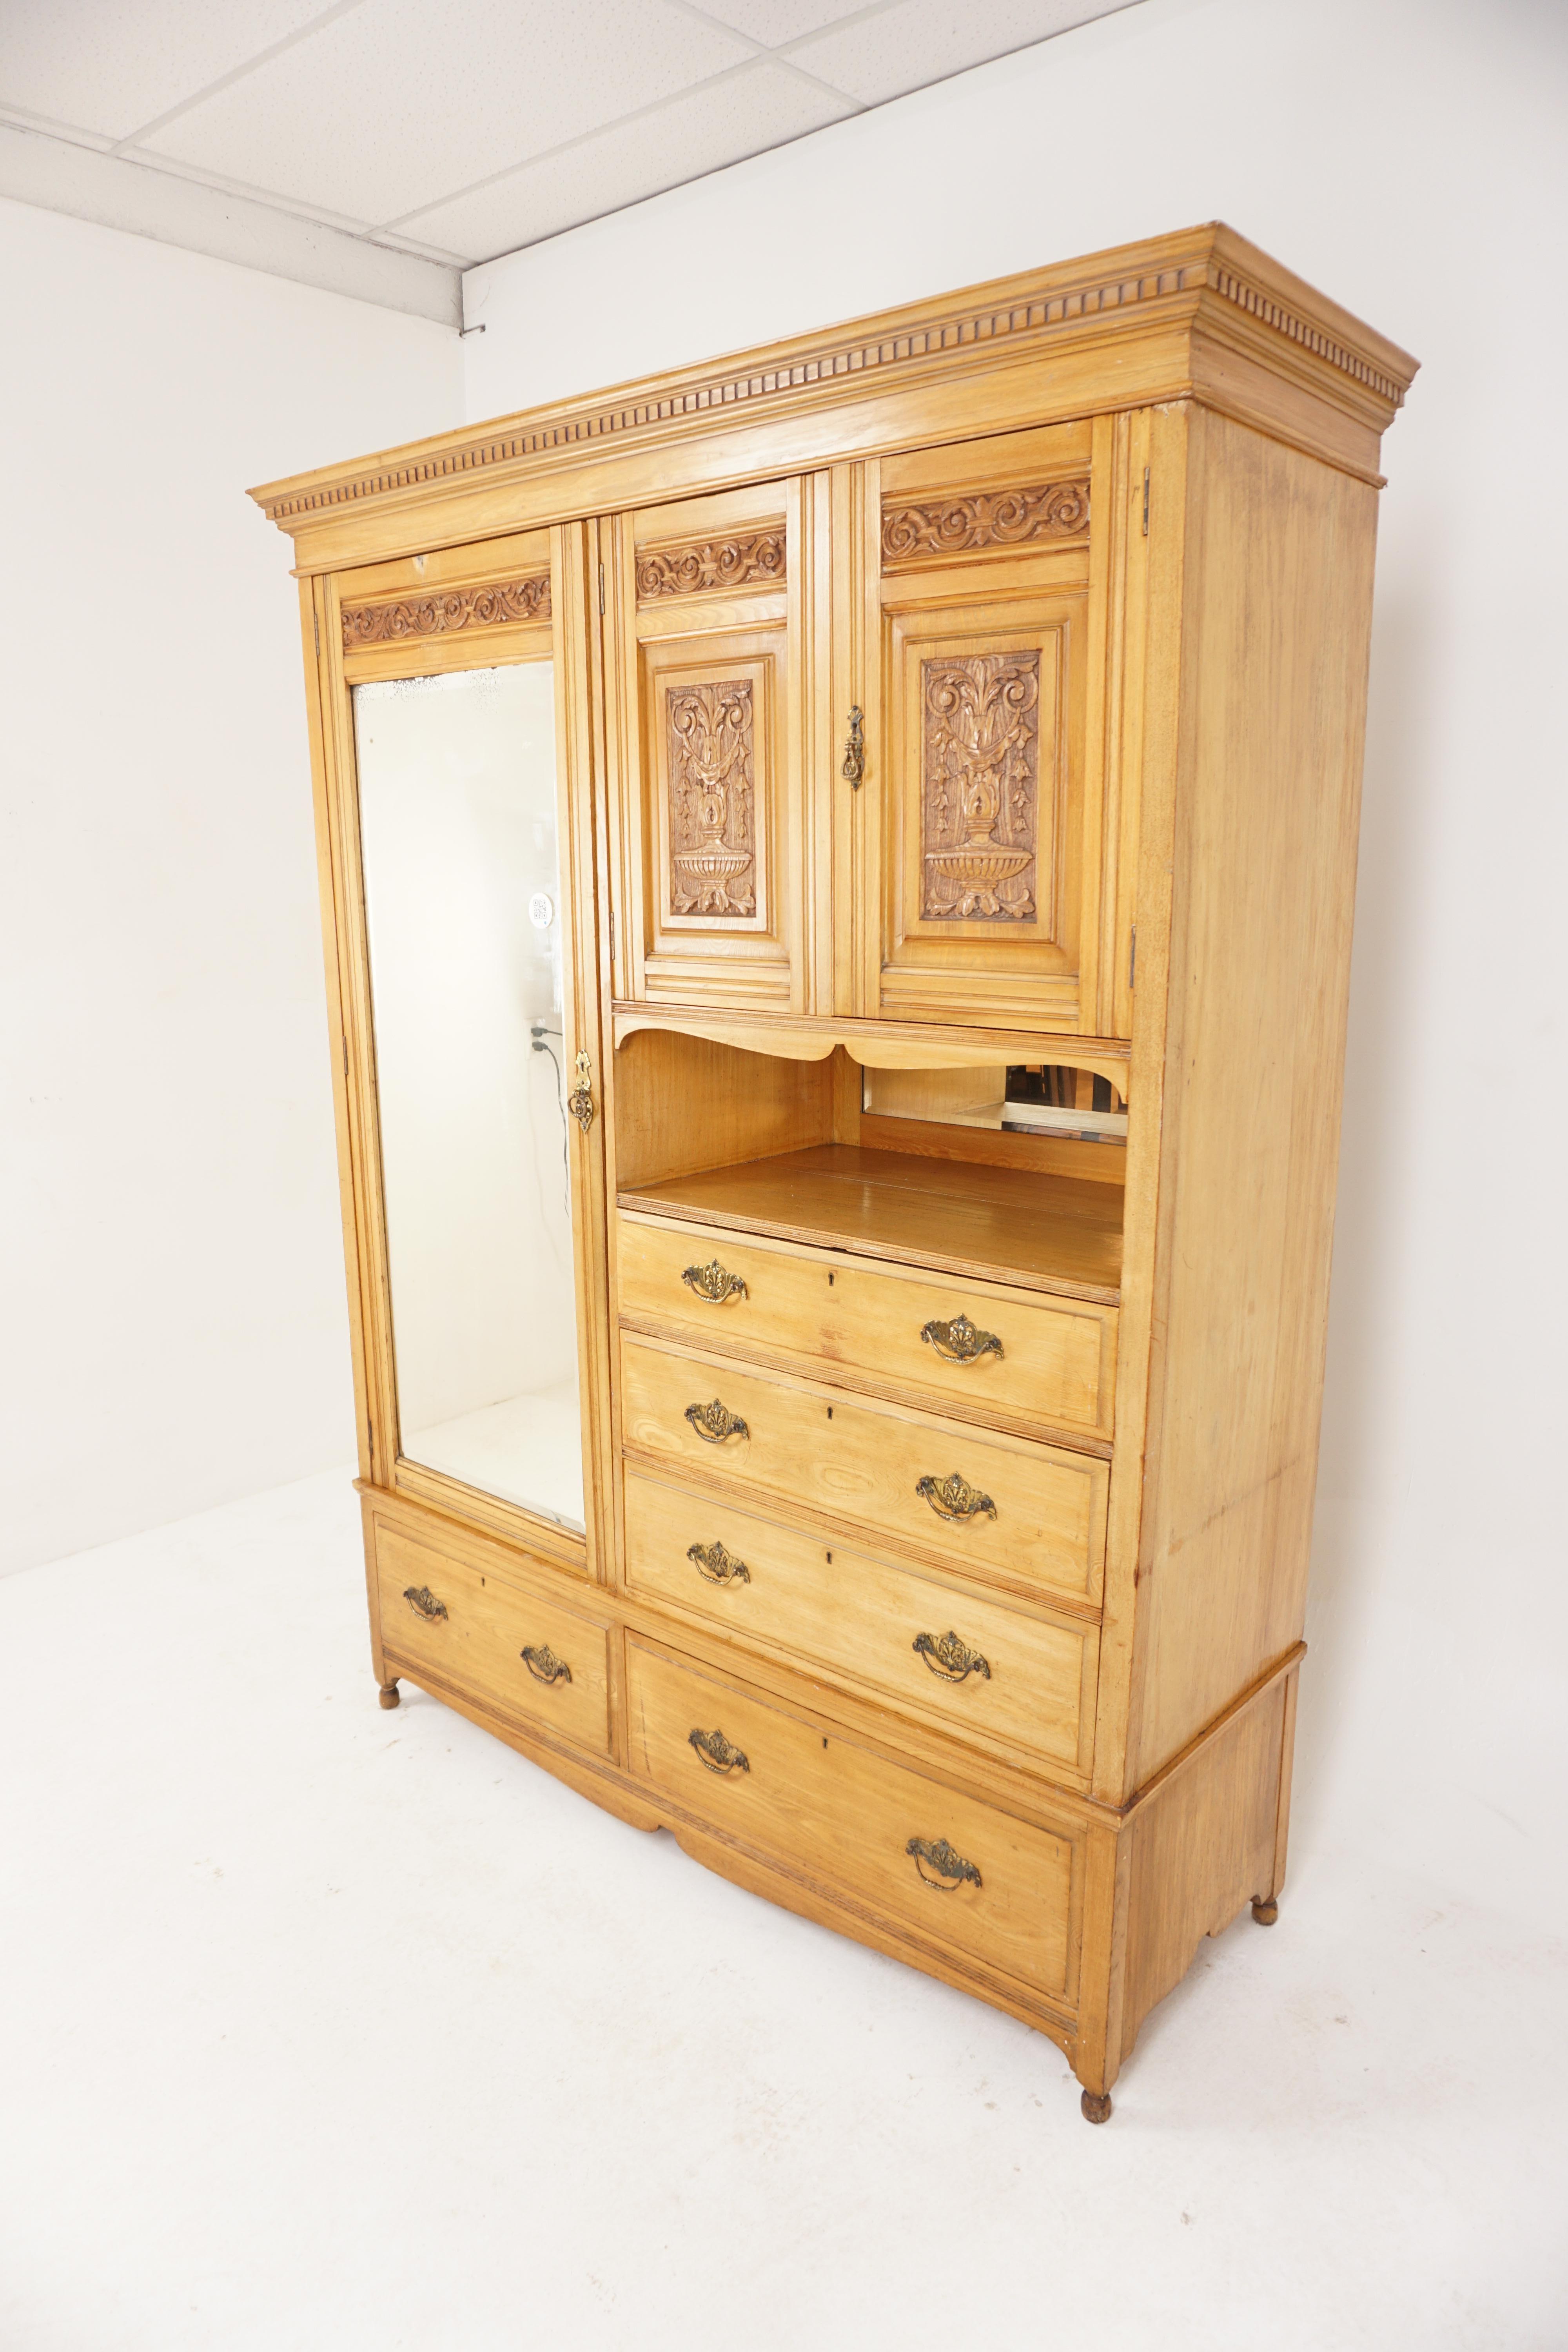 Antique Victorian ash compactum armoire, wardrobe, closet, Scotland 1880, H724

Scotland 1880
Solid Oak
Original Finish
Large dentil cornice on top
With bevelled dressing mirror door
Opens to reveal six brass coat hooks and slide out